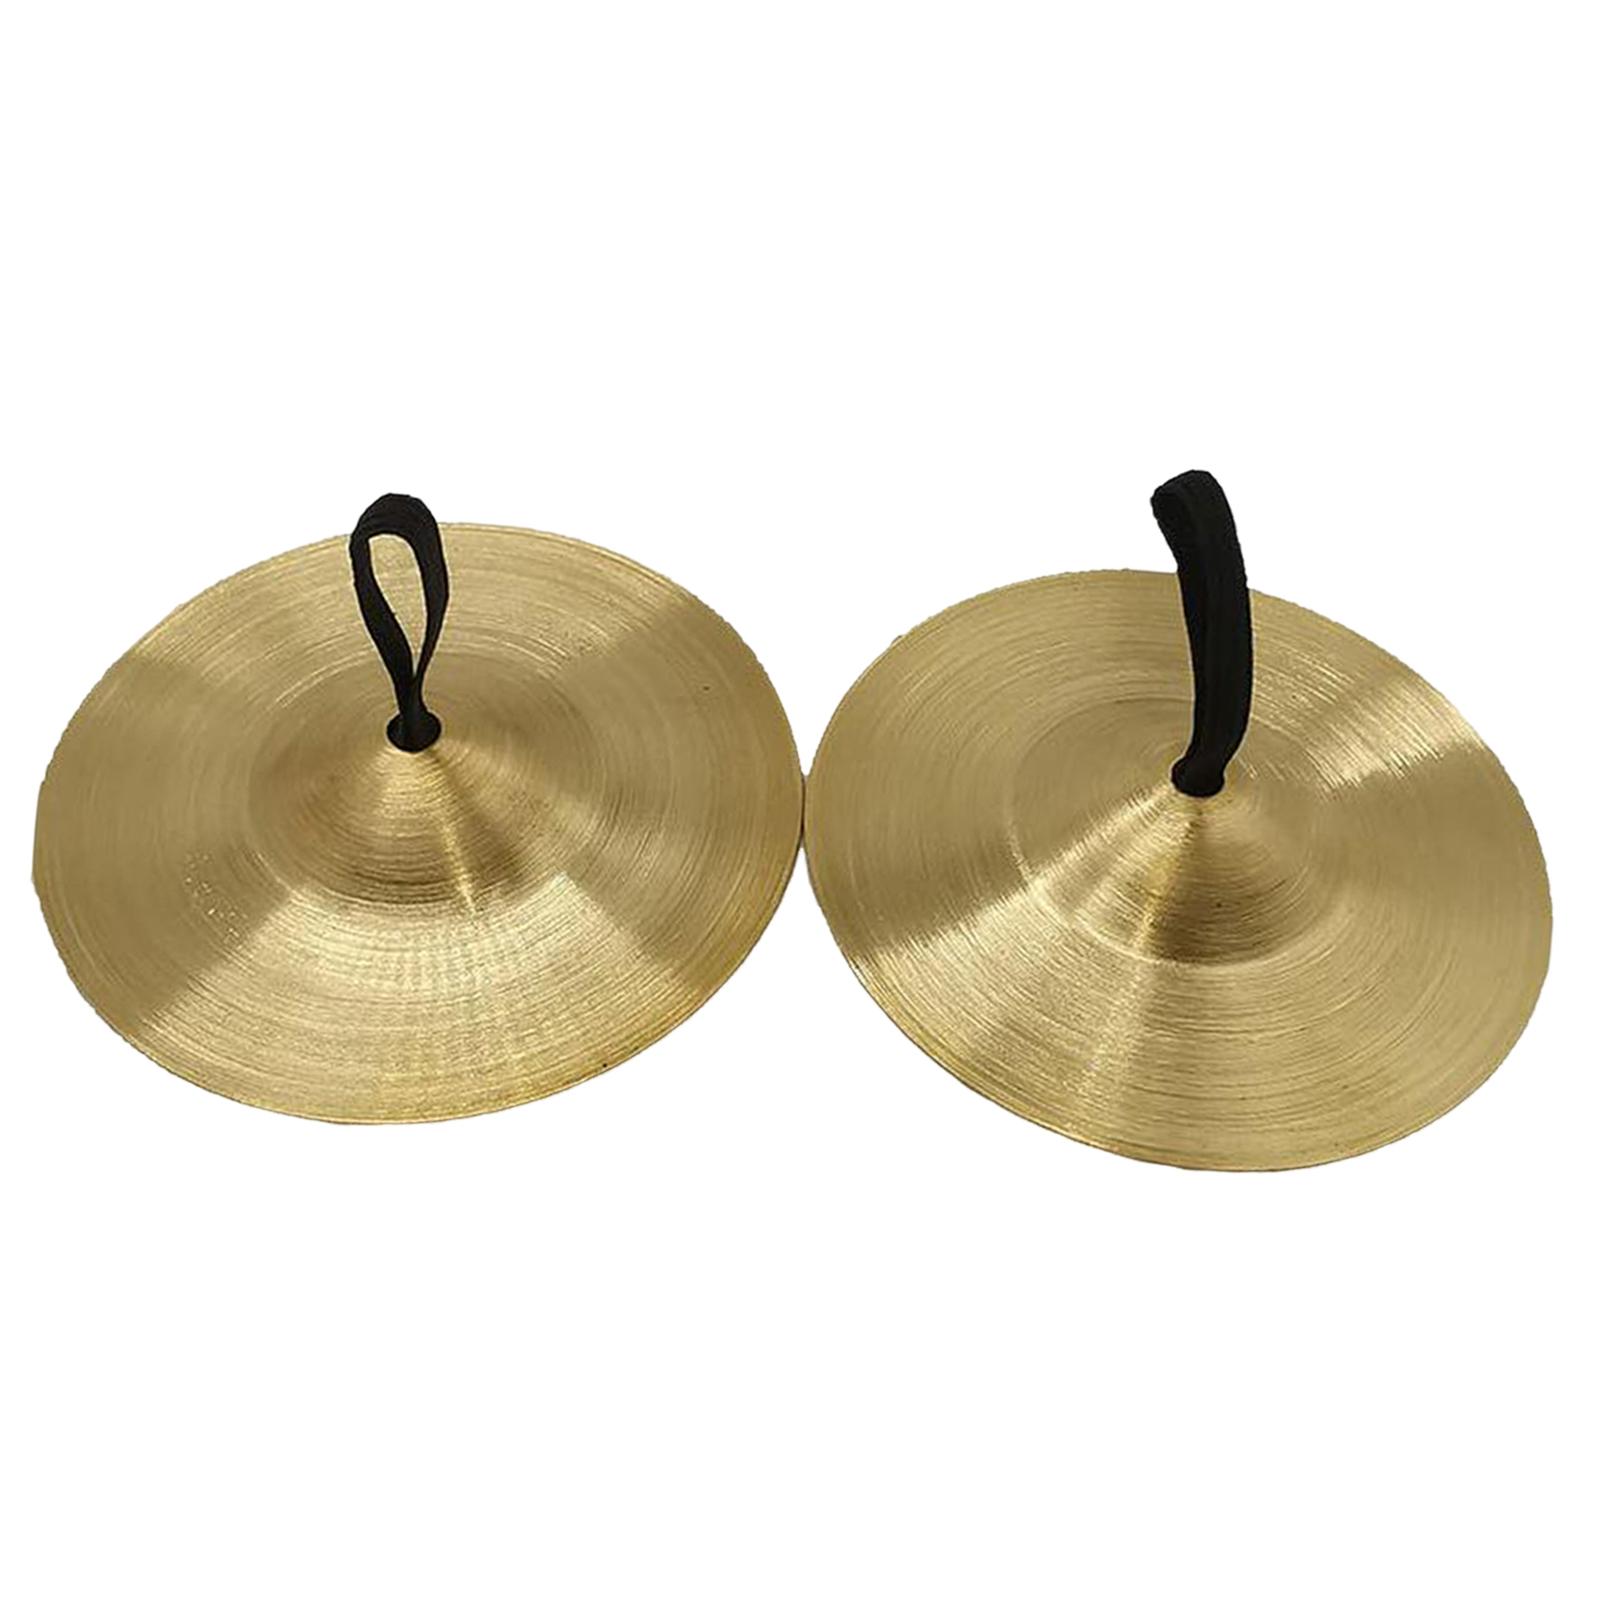 Hand Cymbals Kids Handheld Cymbals Musical Instrument copper Crash Cymbal for Kids ,Finger Cymbals for Activity, Events, Chorus, Presentations 9cm - image 2 of 8